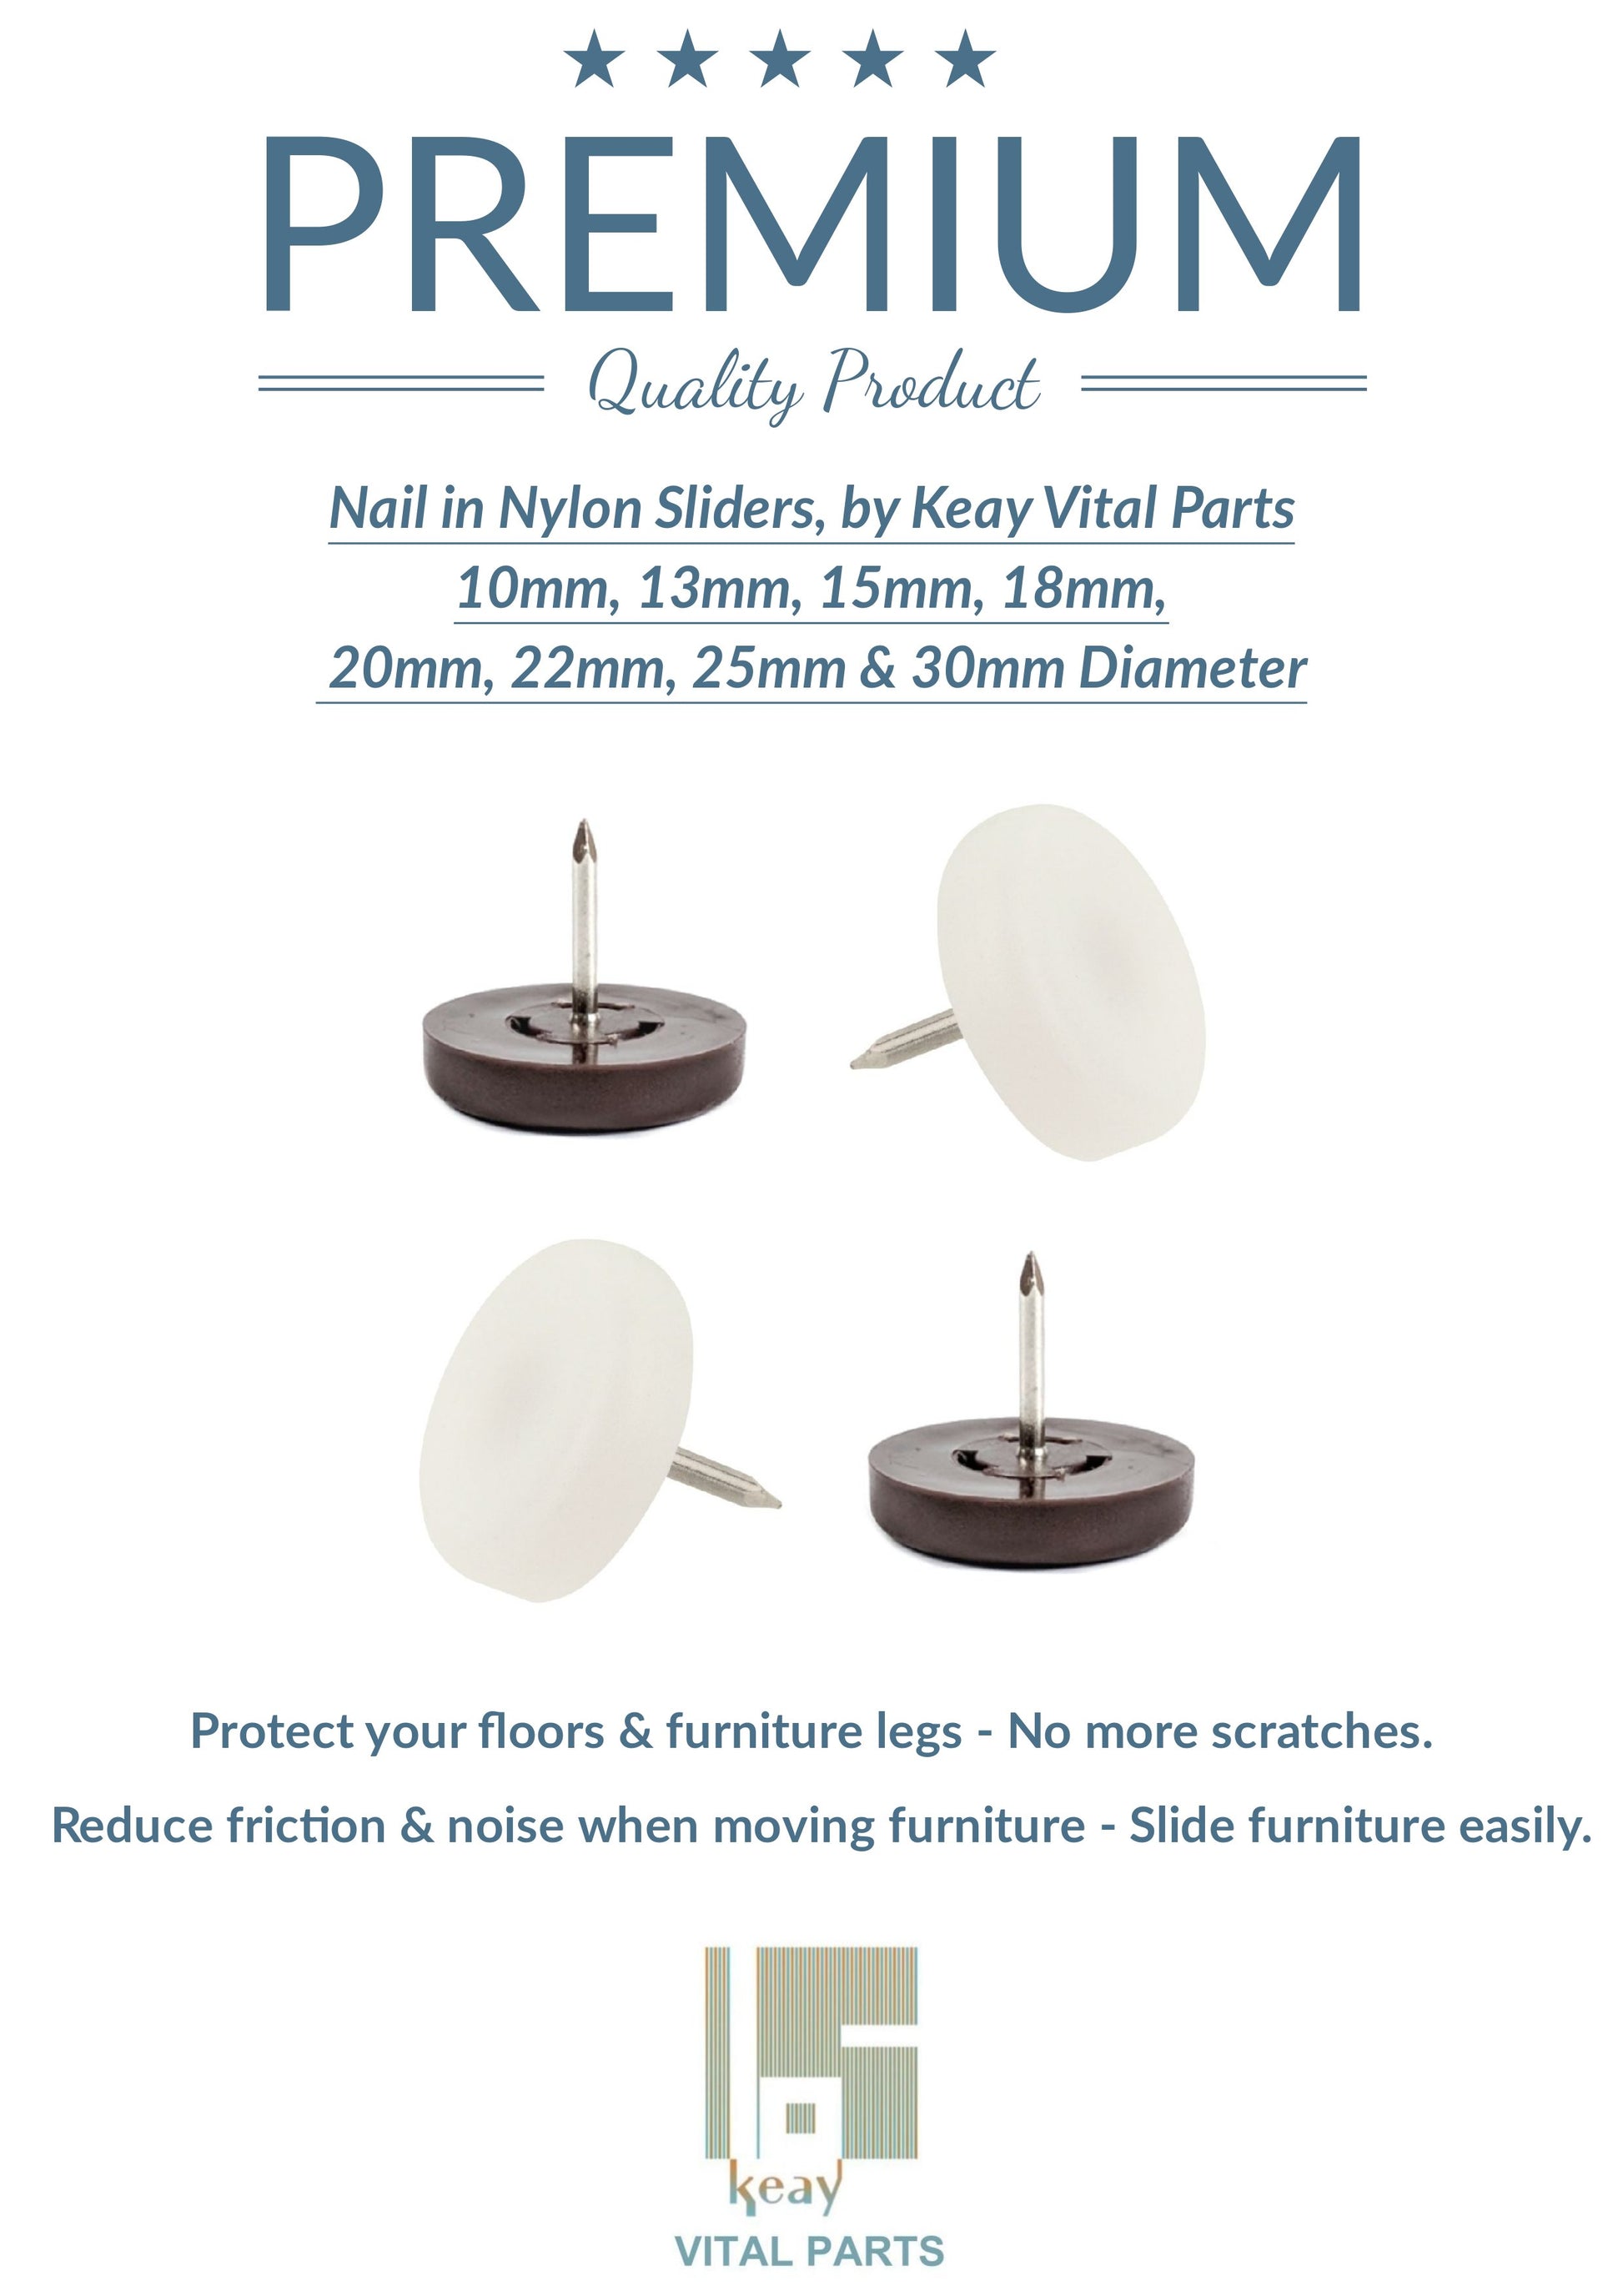 30mm White Nylon Nail On Gliders - Made in Germany - Keay Vital Parts